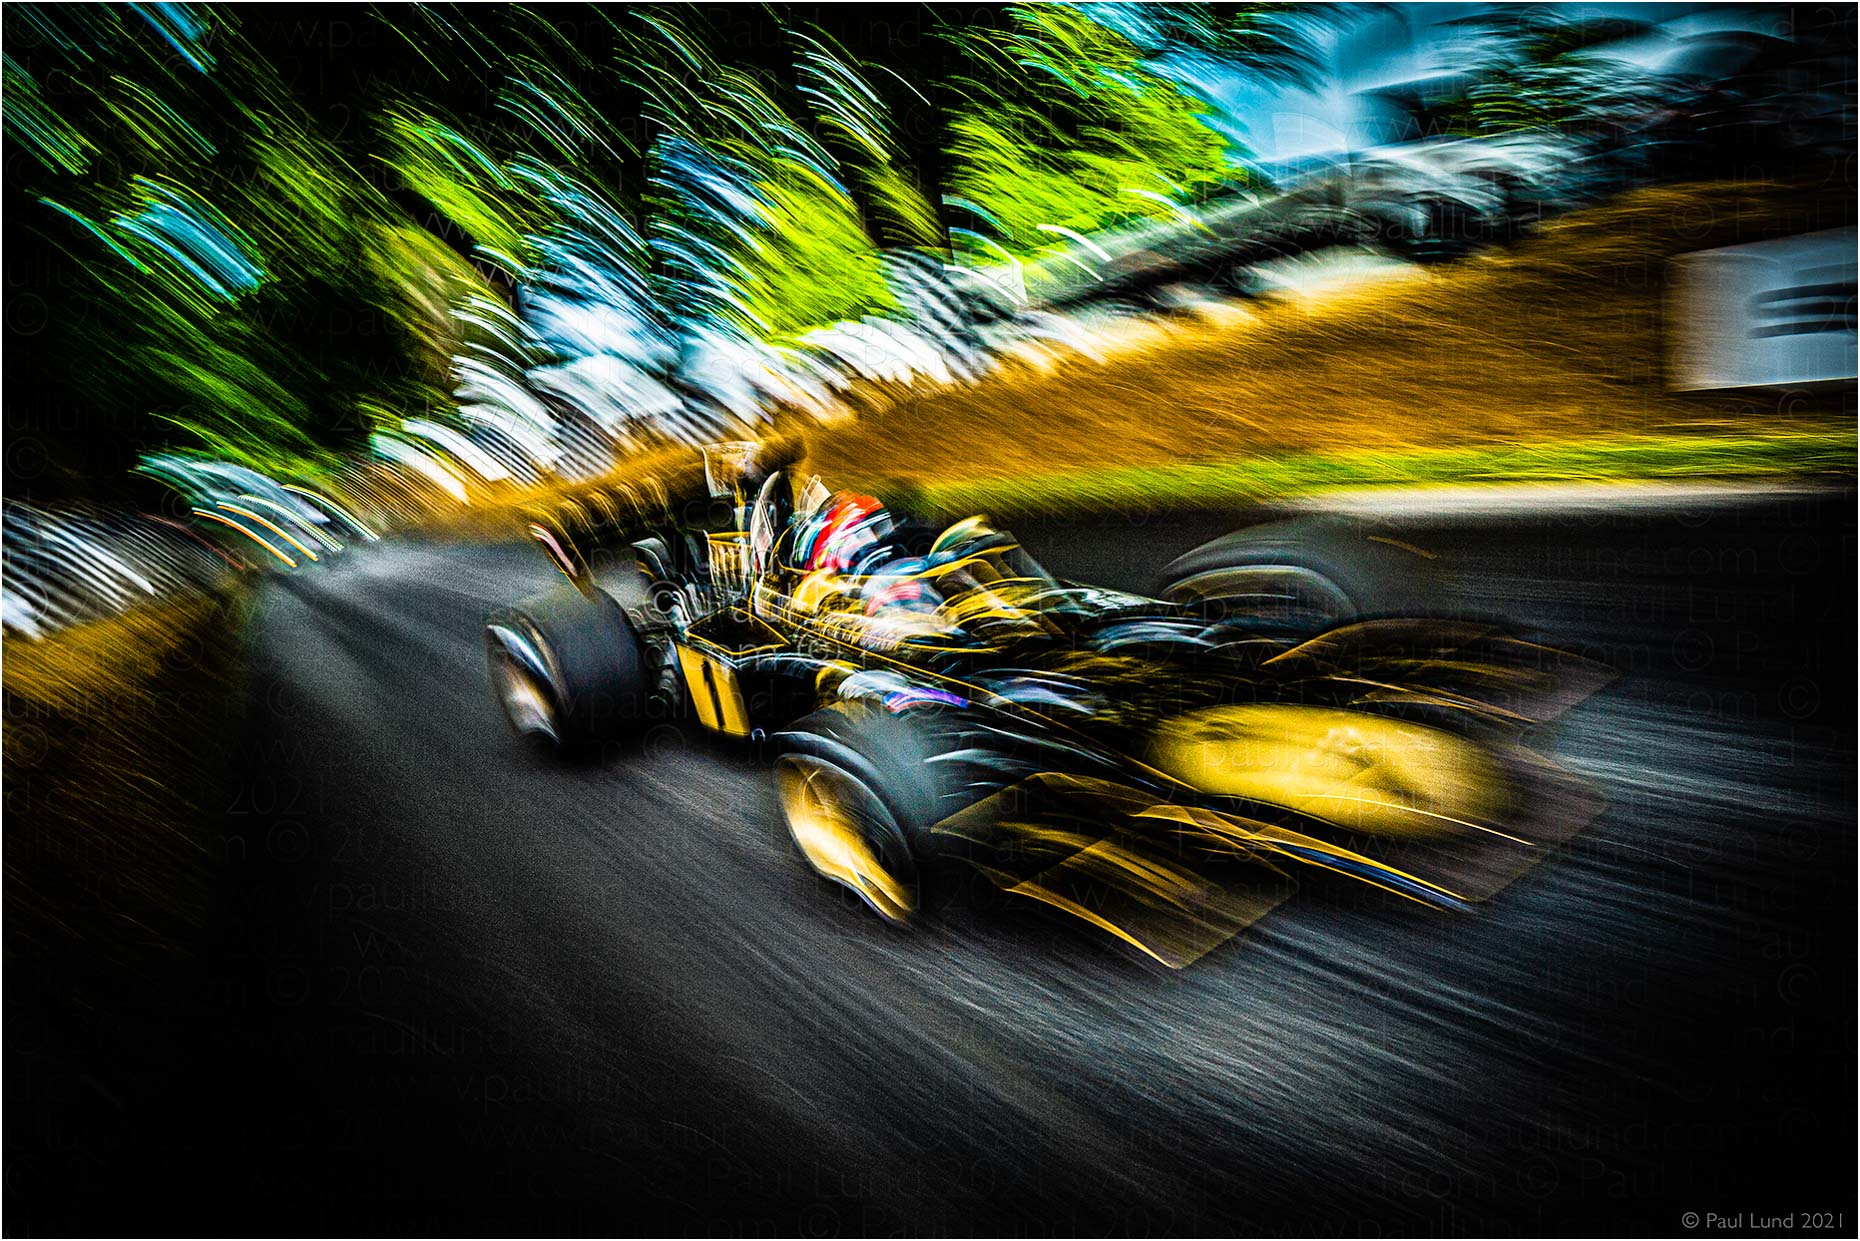 1972 World Champion Emerson Fittipaldi in the John Player Special Lotus Cosworth 72 at Goodwood Festival of Speed 2021. Photographer: Paul Lund